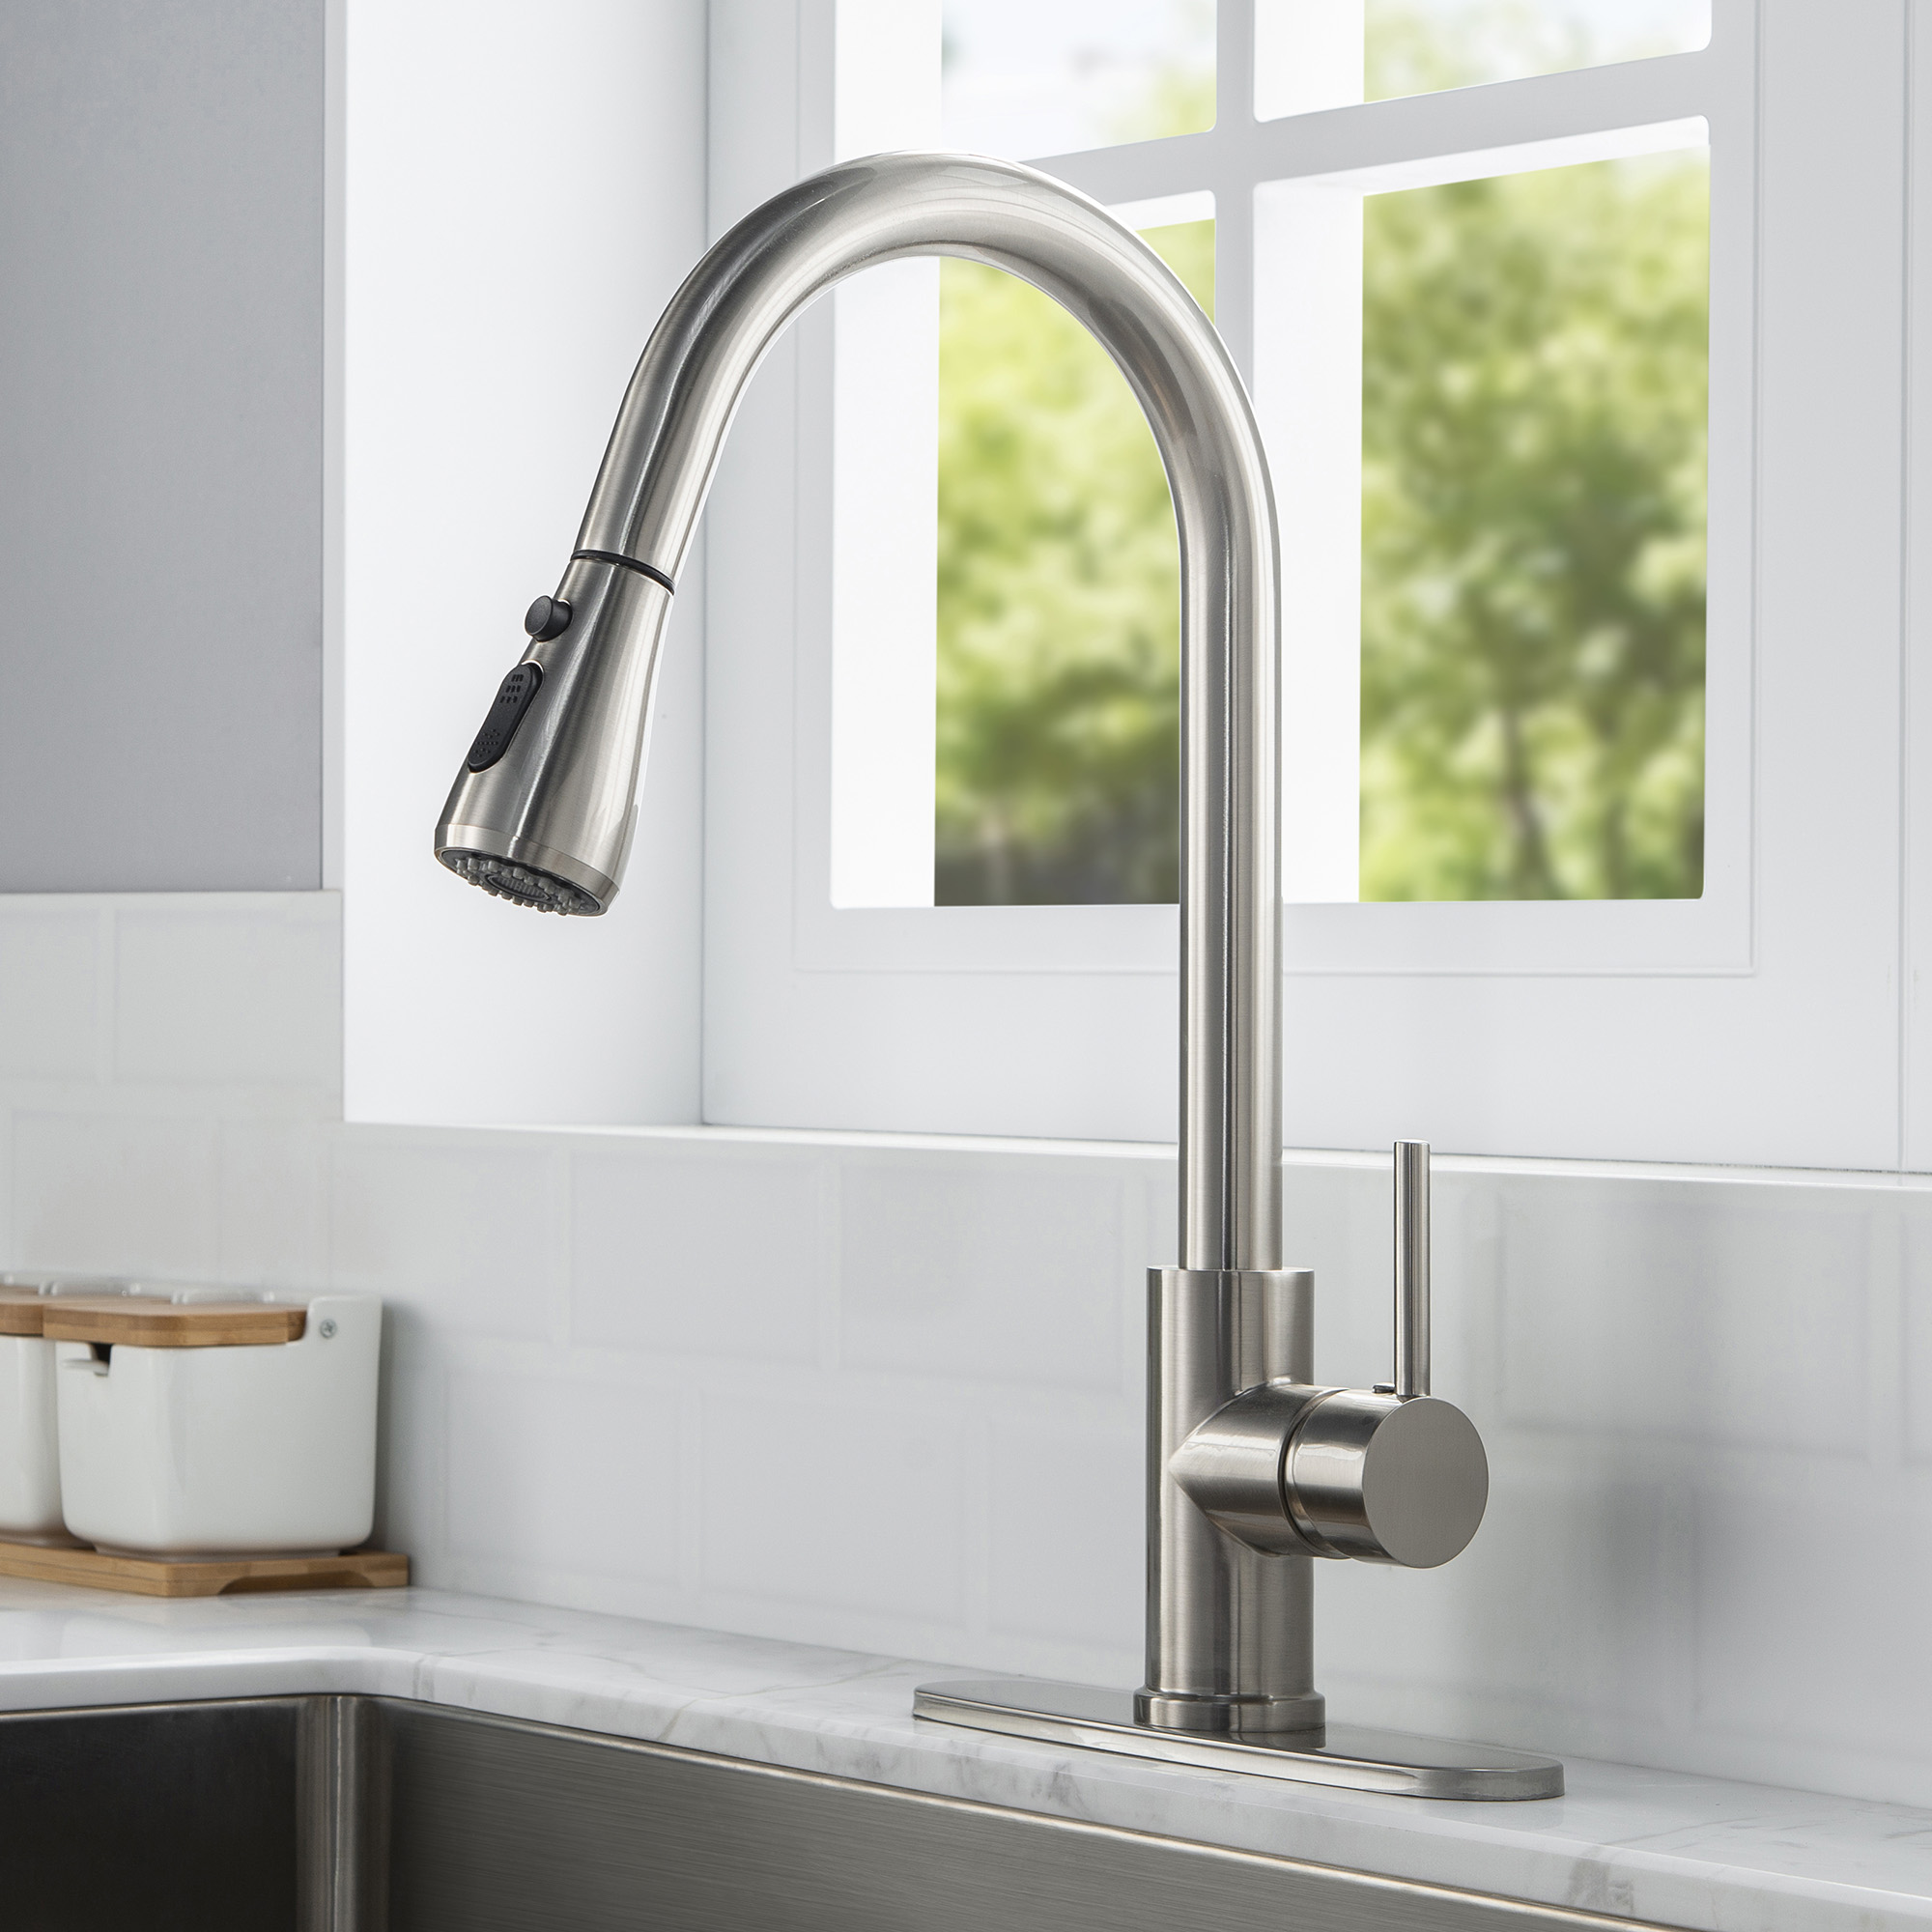 WOODBRIDGE WK090802BN Single Handle Pull Down Kitchen Faucet in Brushed Nickel Finish